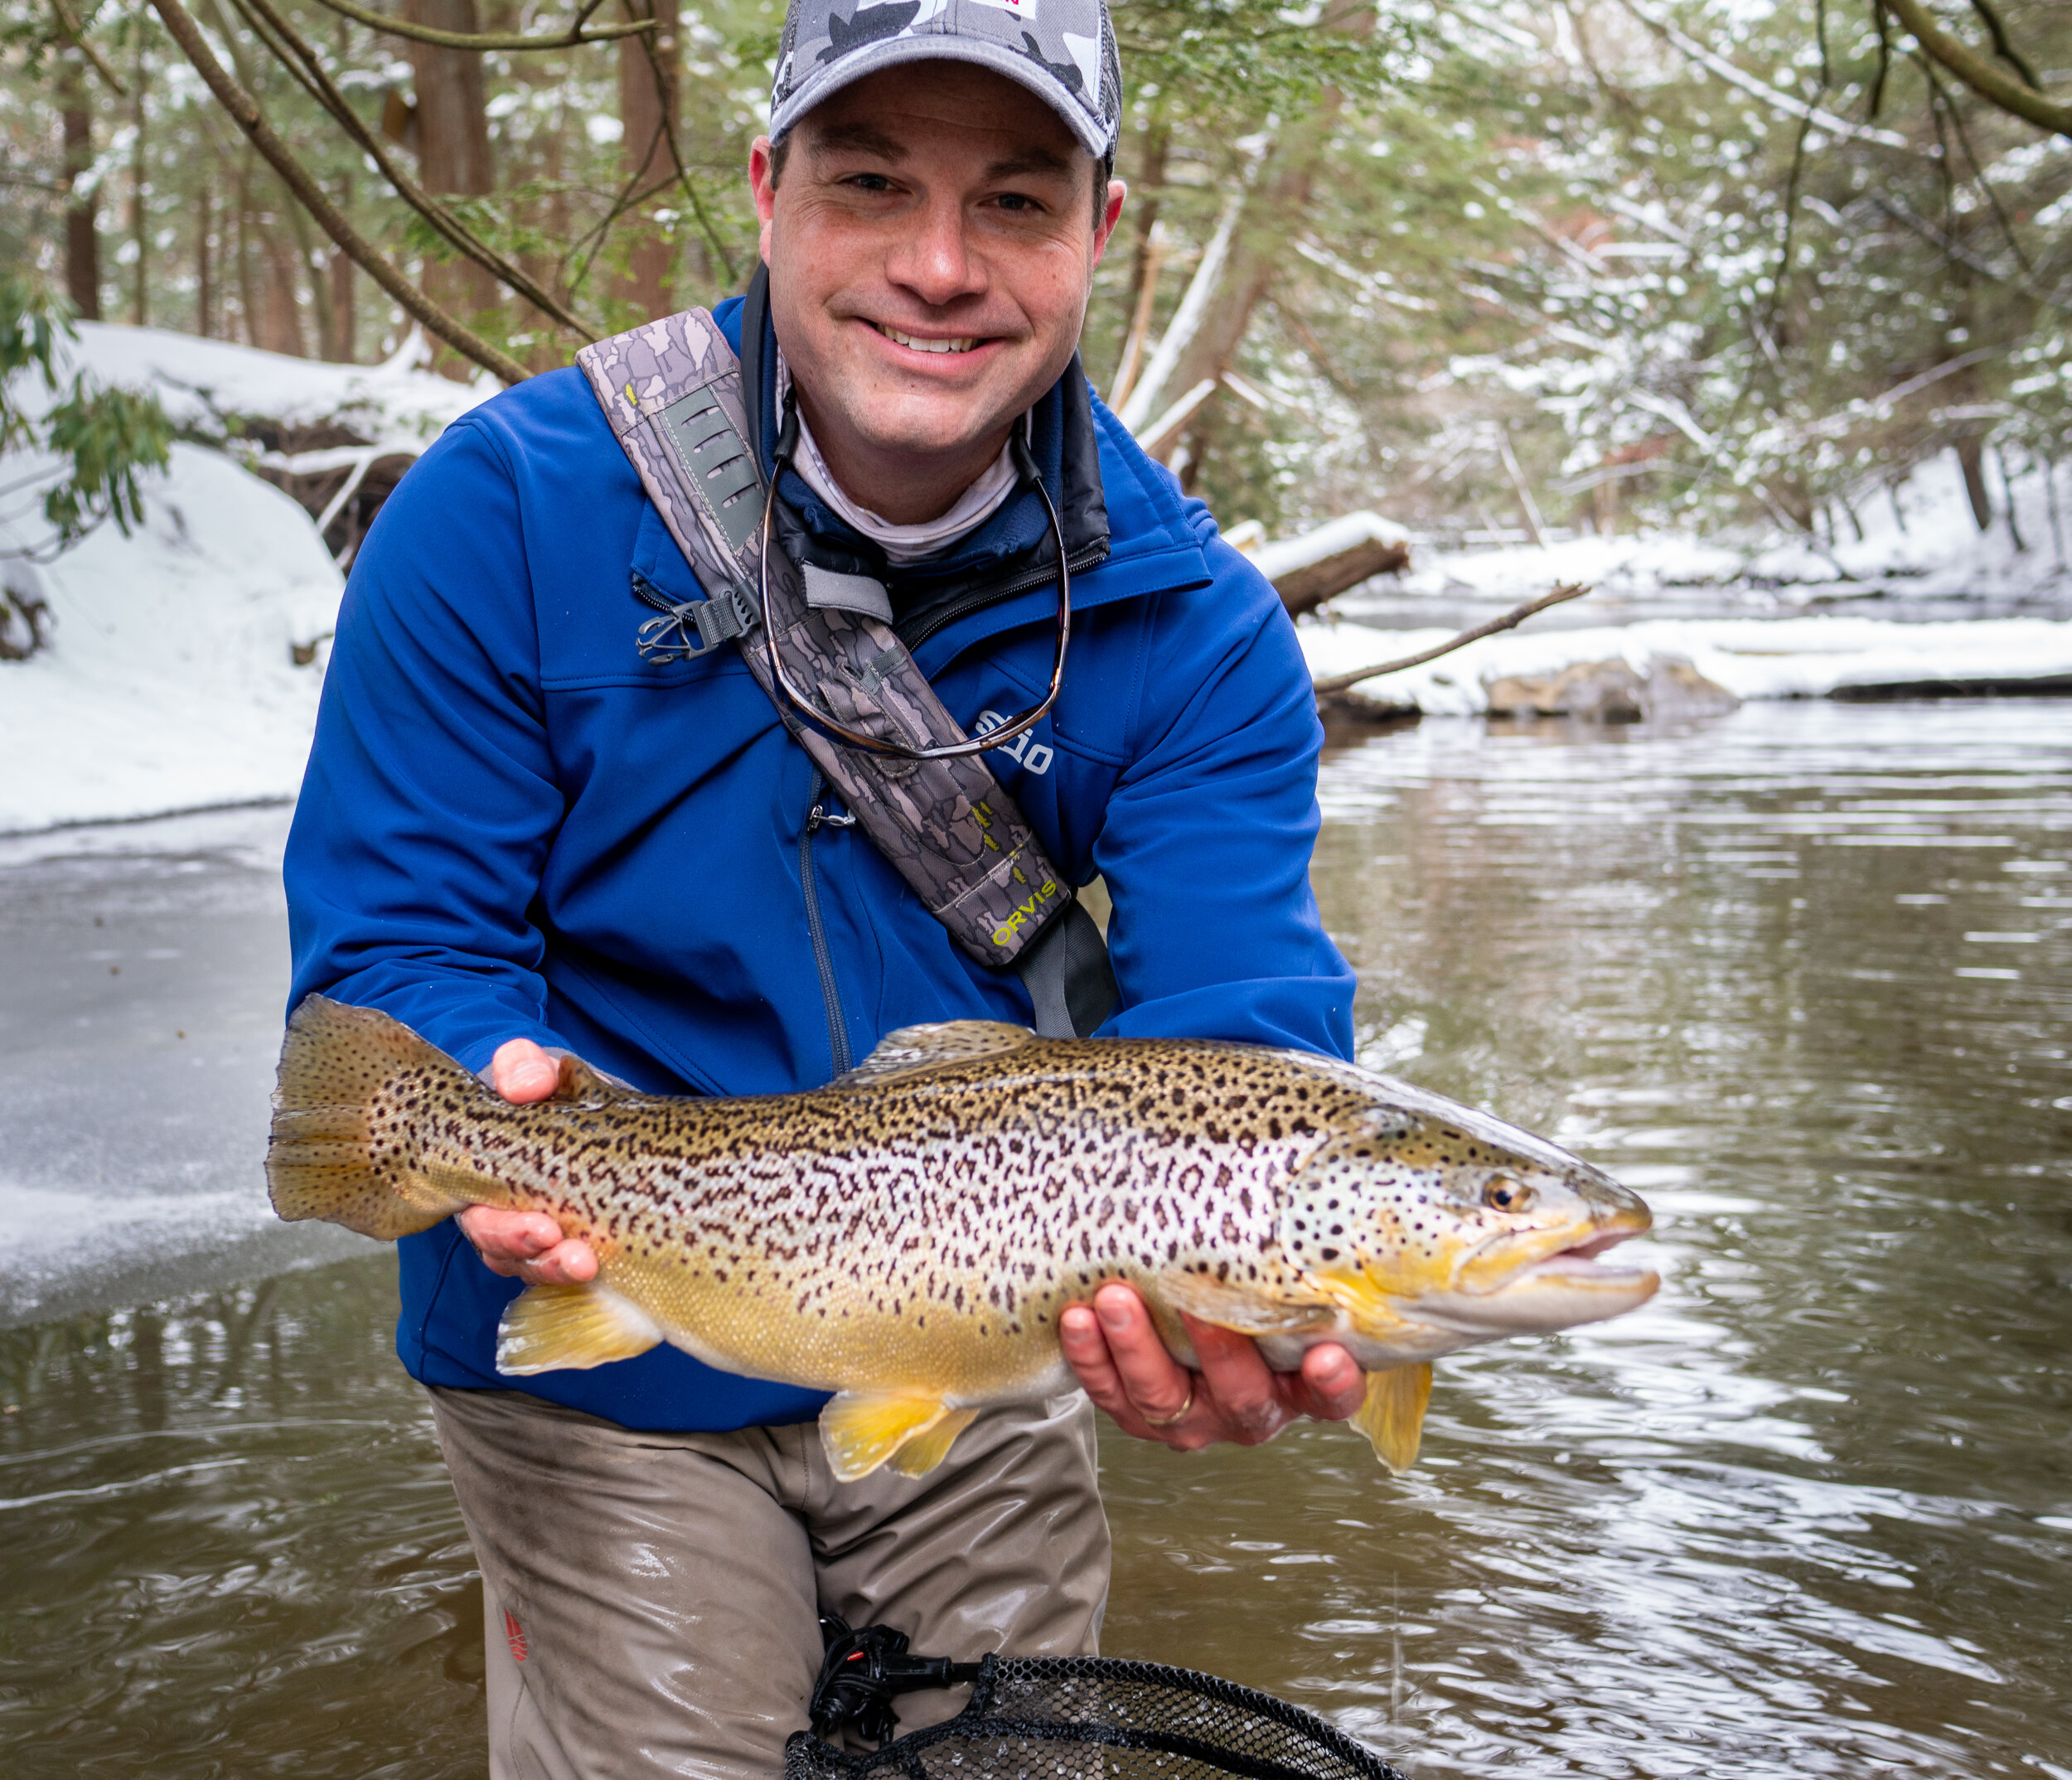 Winter Fly Fishing Gear: 17 Items To Conquer The Cold - Fly Fishing Fix